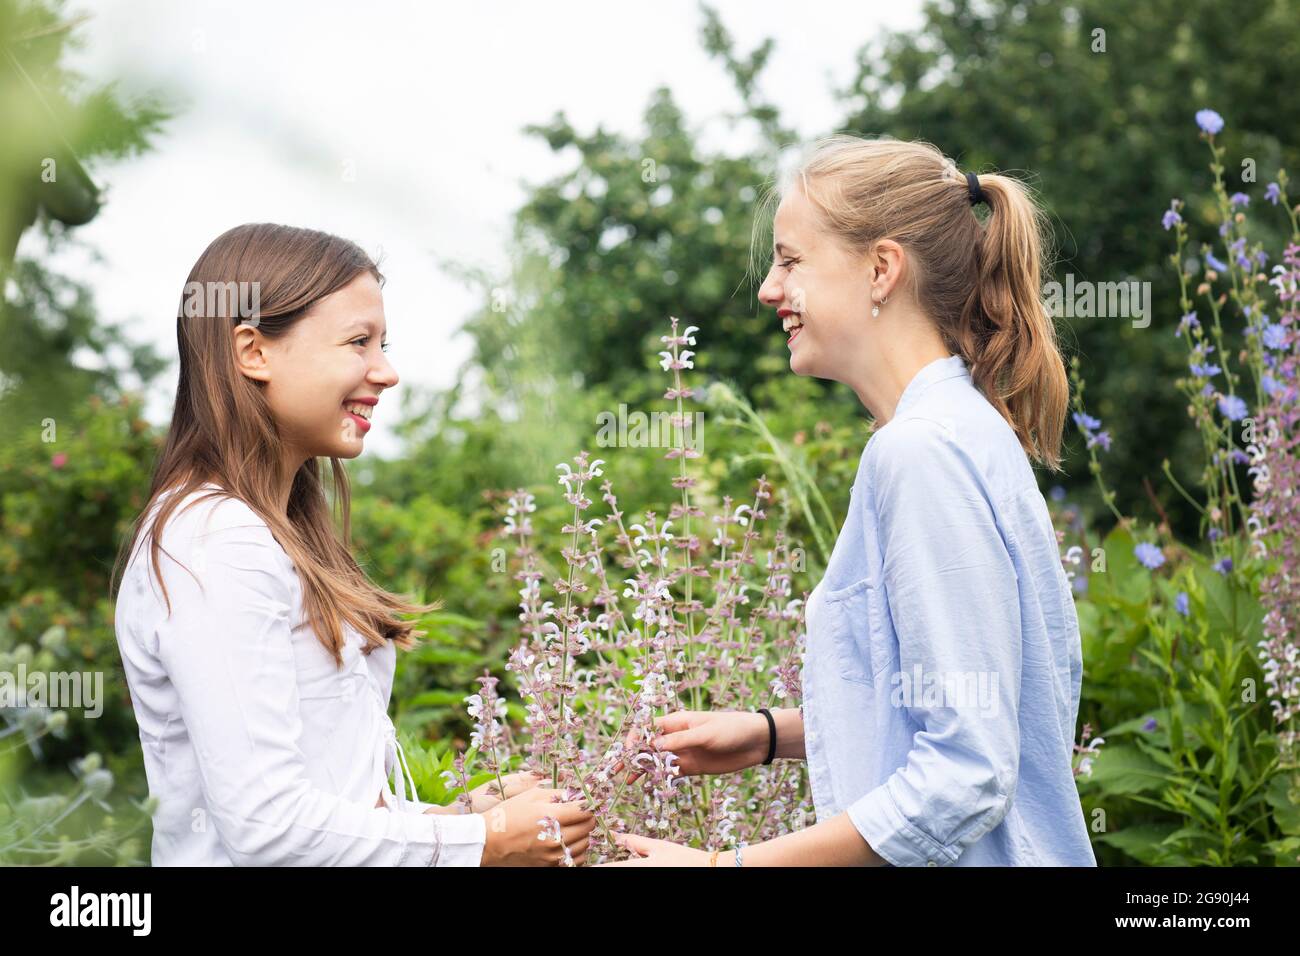 Happy young women looking at each other while touching flowering plant Stock Photo